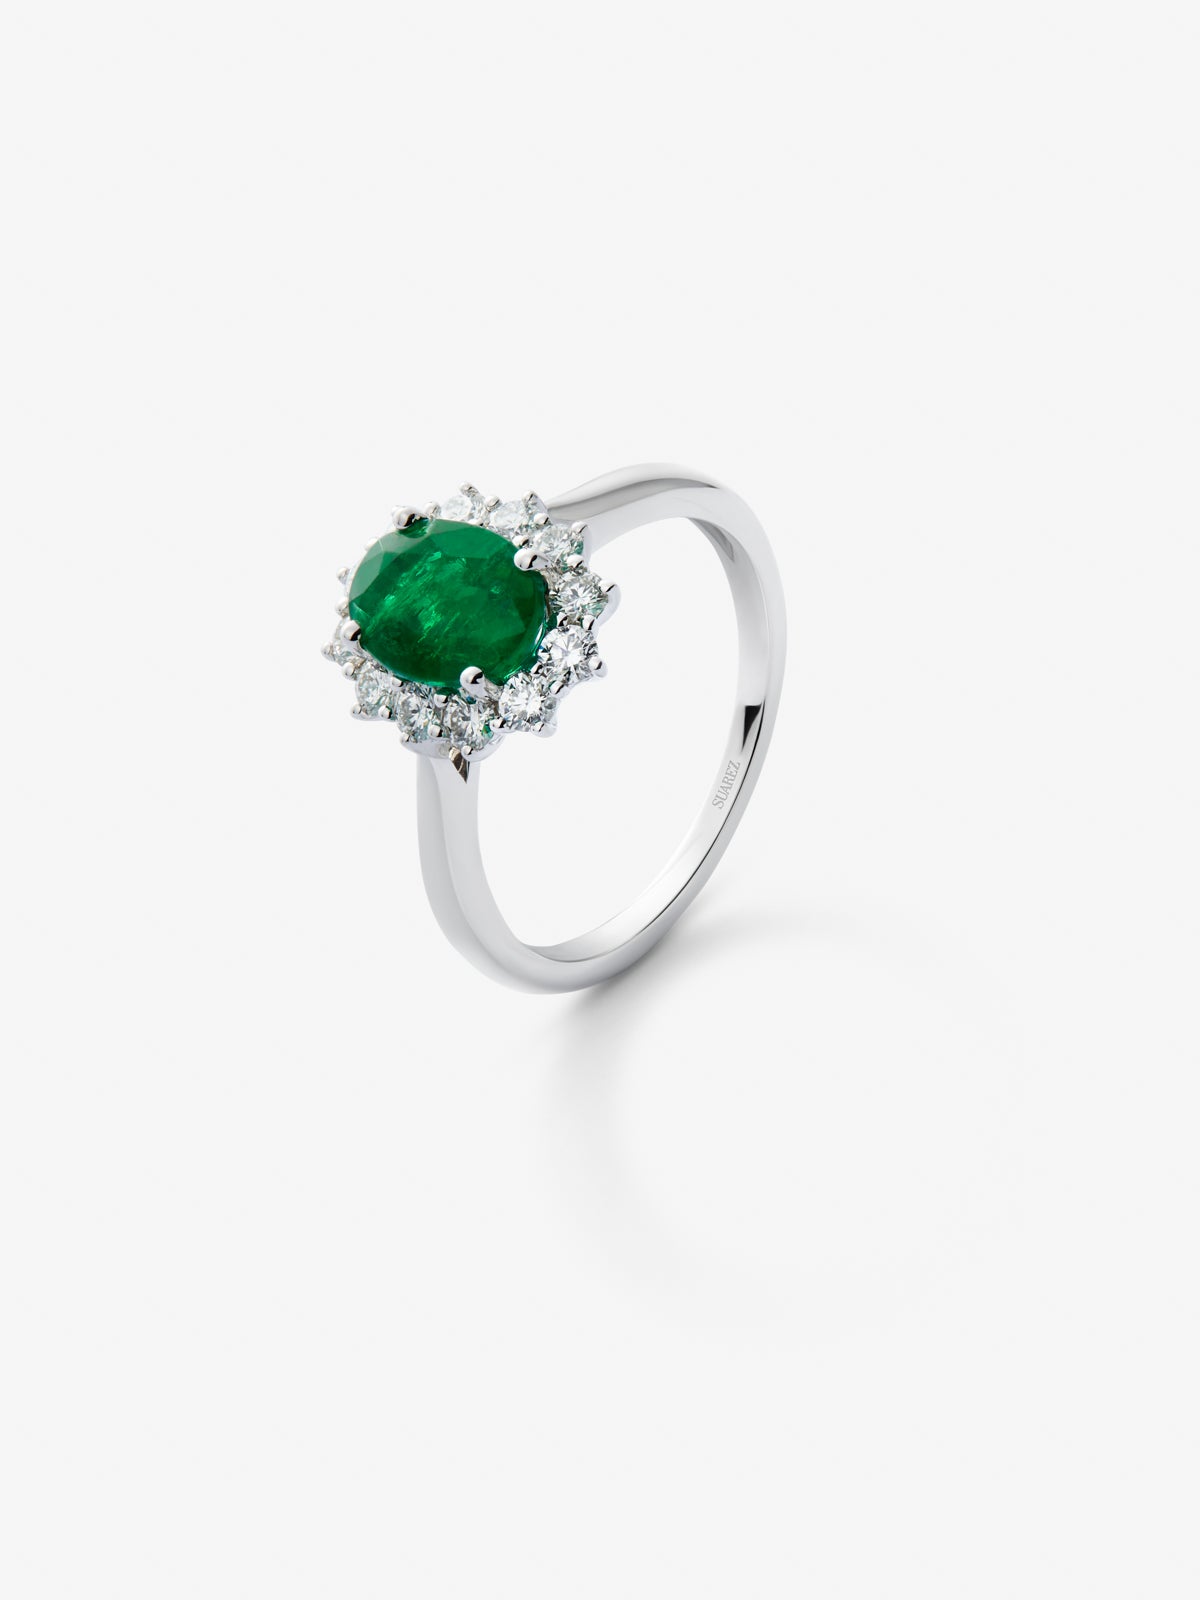 18K white gold ring with oval-cut emerald of 0.77 cts and 12 brilliant-cut diamonds with a total of 0.24 cts